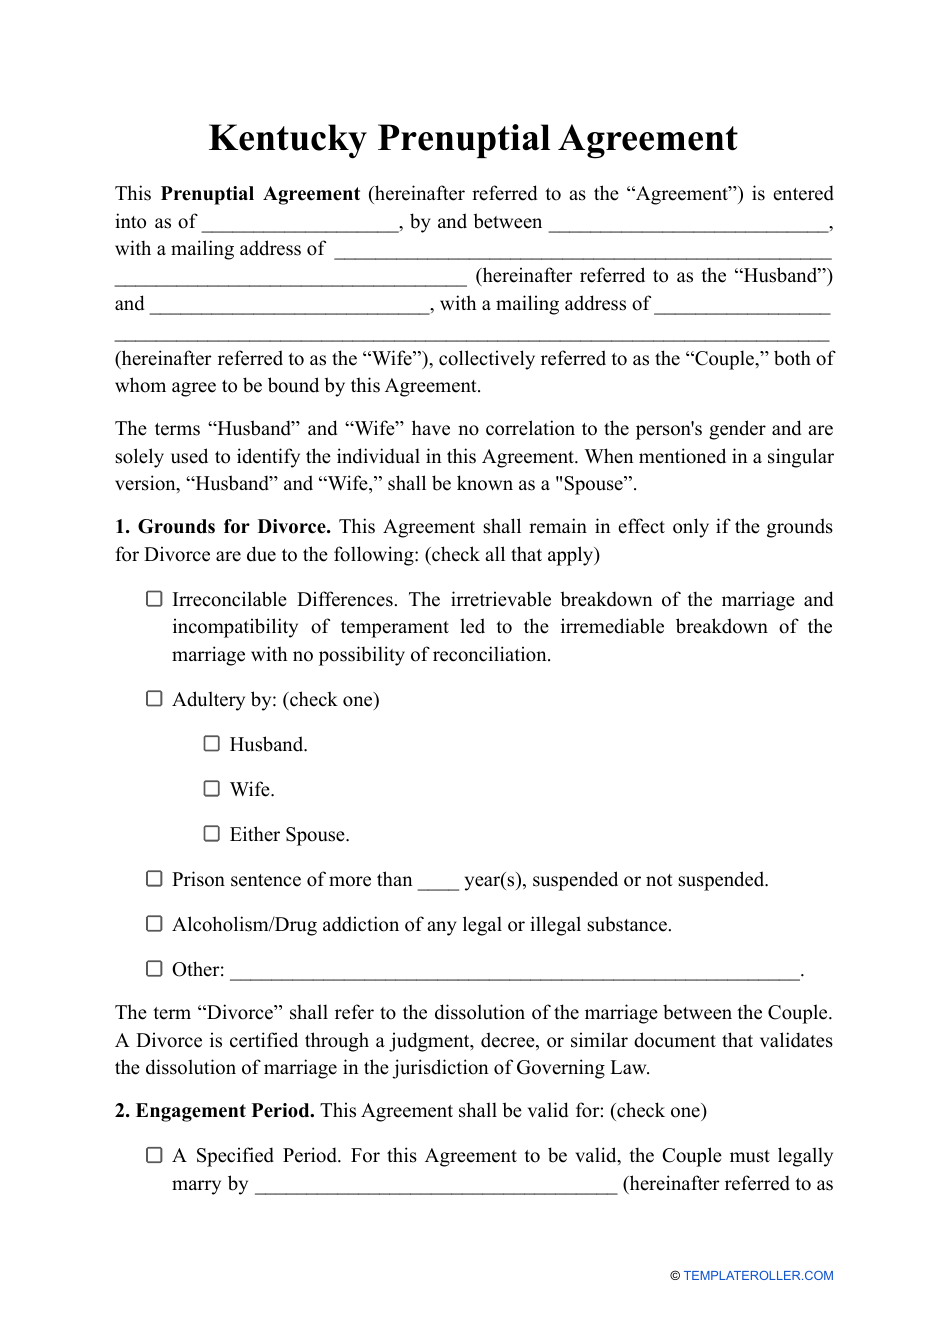 Prenuptial Agreement Template - Kentucky, Page 1